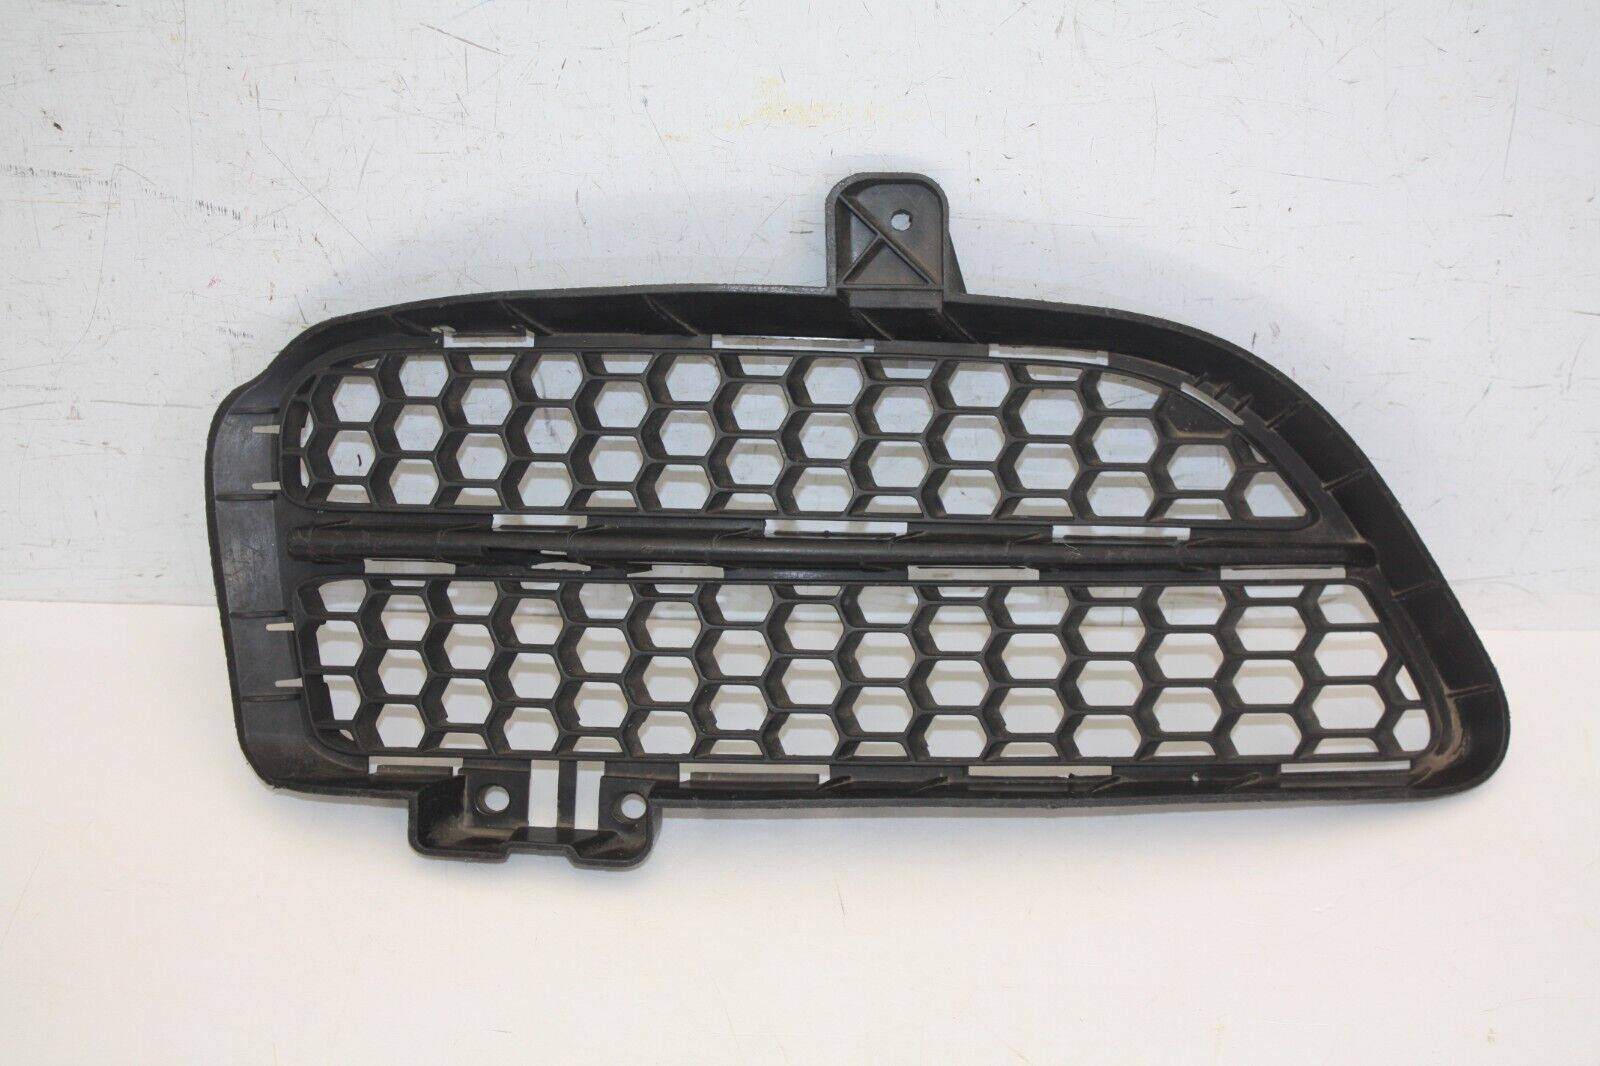 VW-Touareg-Front-Bumper-Right-Grill-2007-TO-2010-7L6853666B-Genuine-176241219097